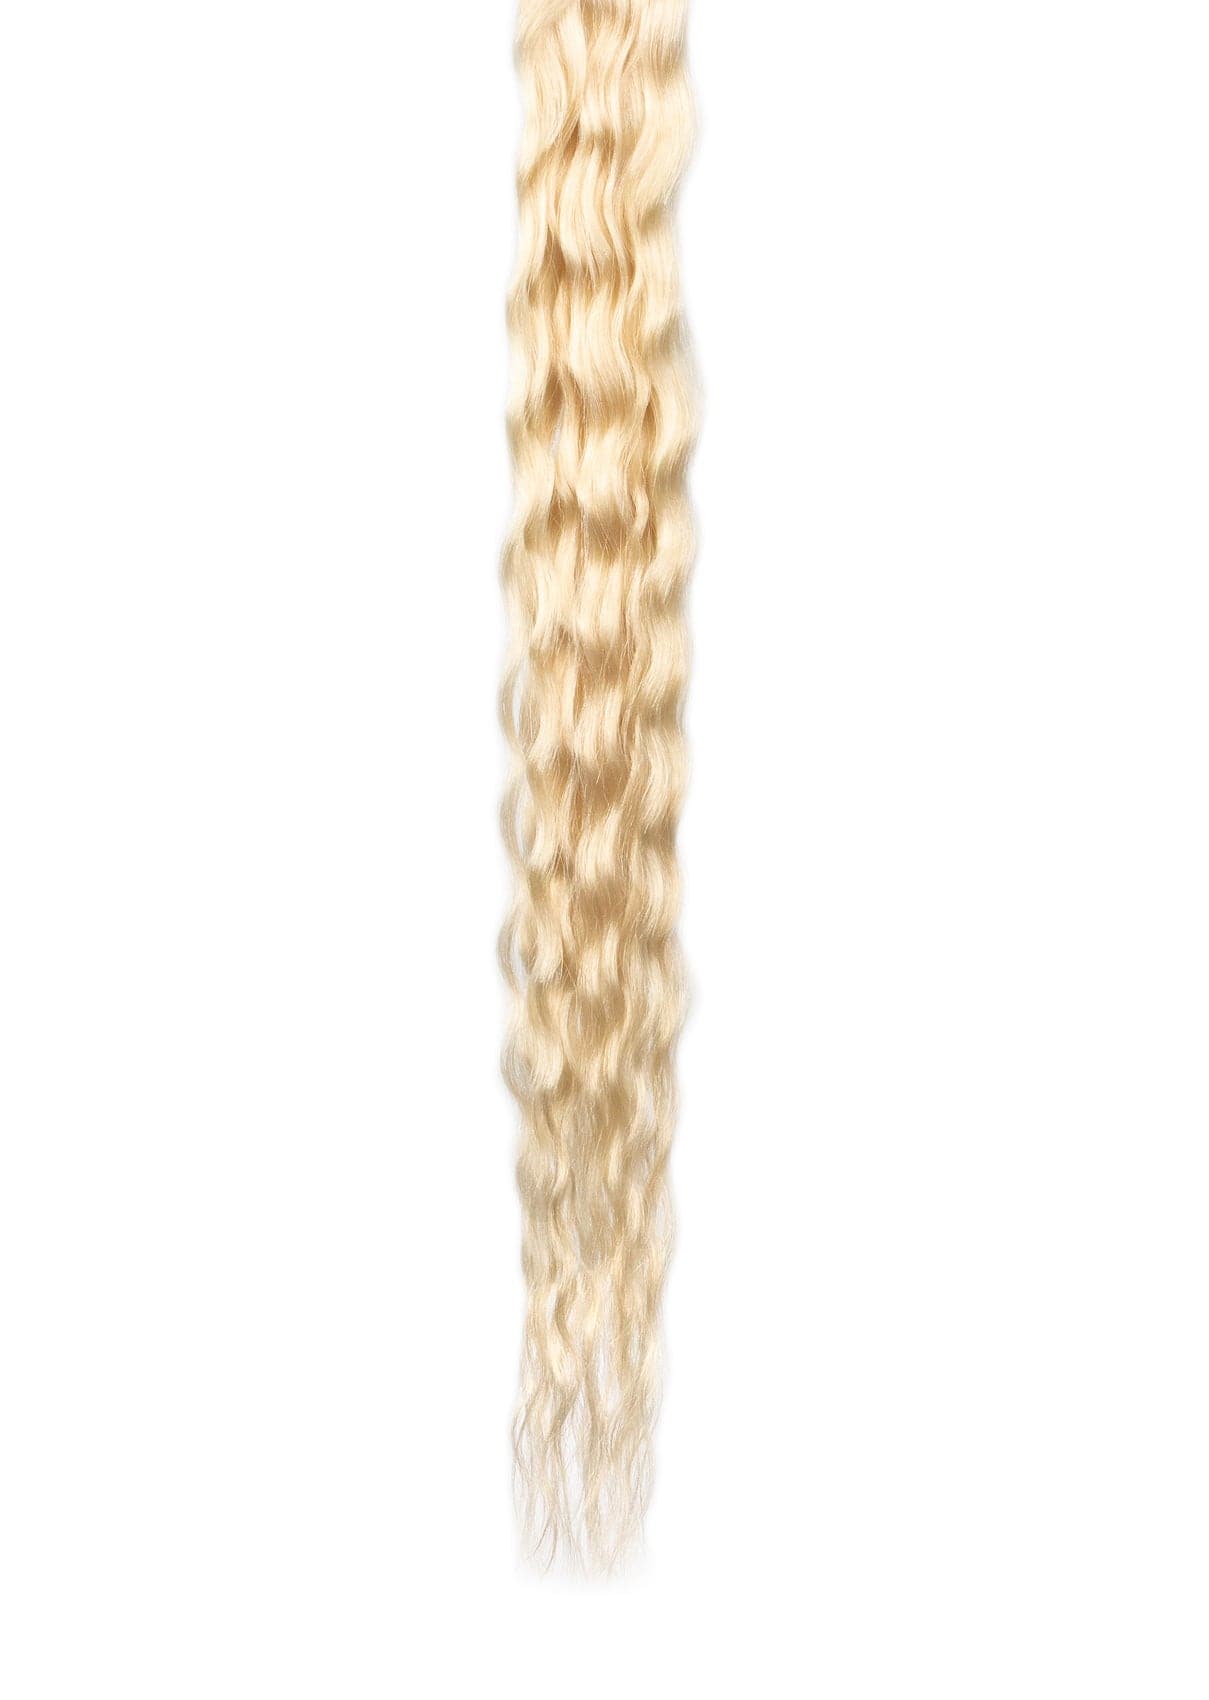 Kera-Link Pro Curly Color #600 Blond